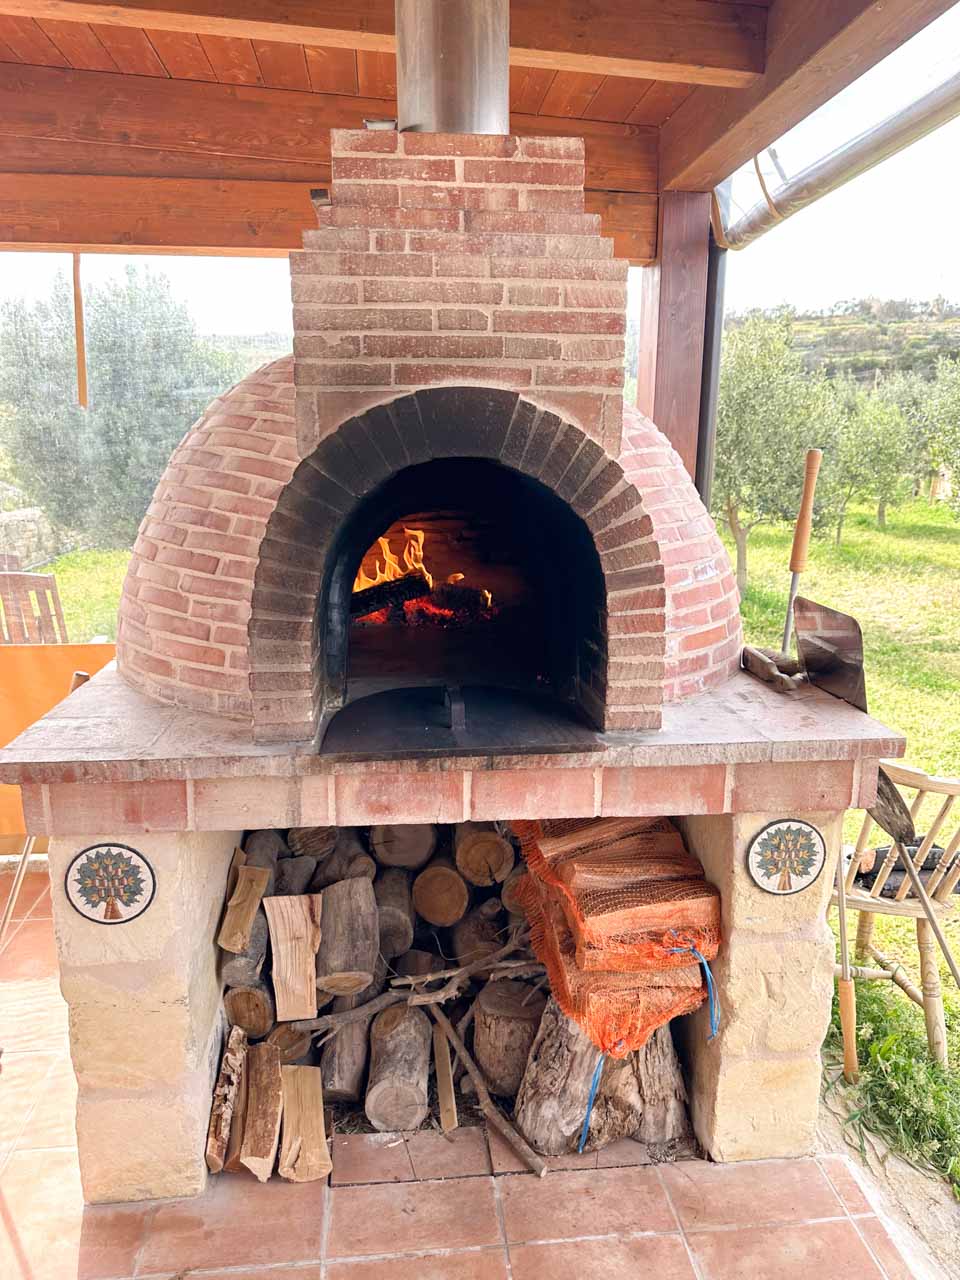 An outdoor wood-fired brick pizza oven